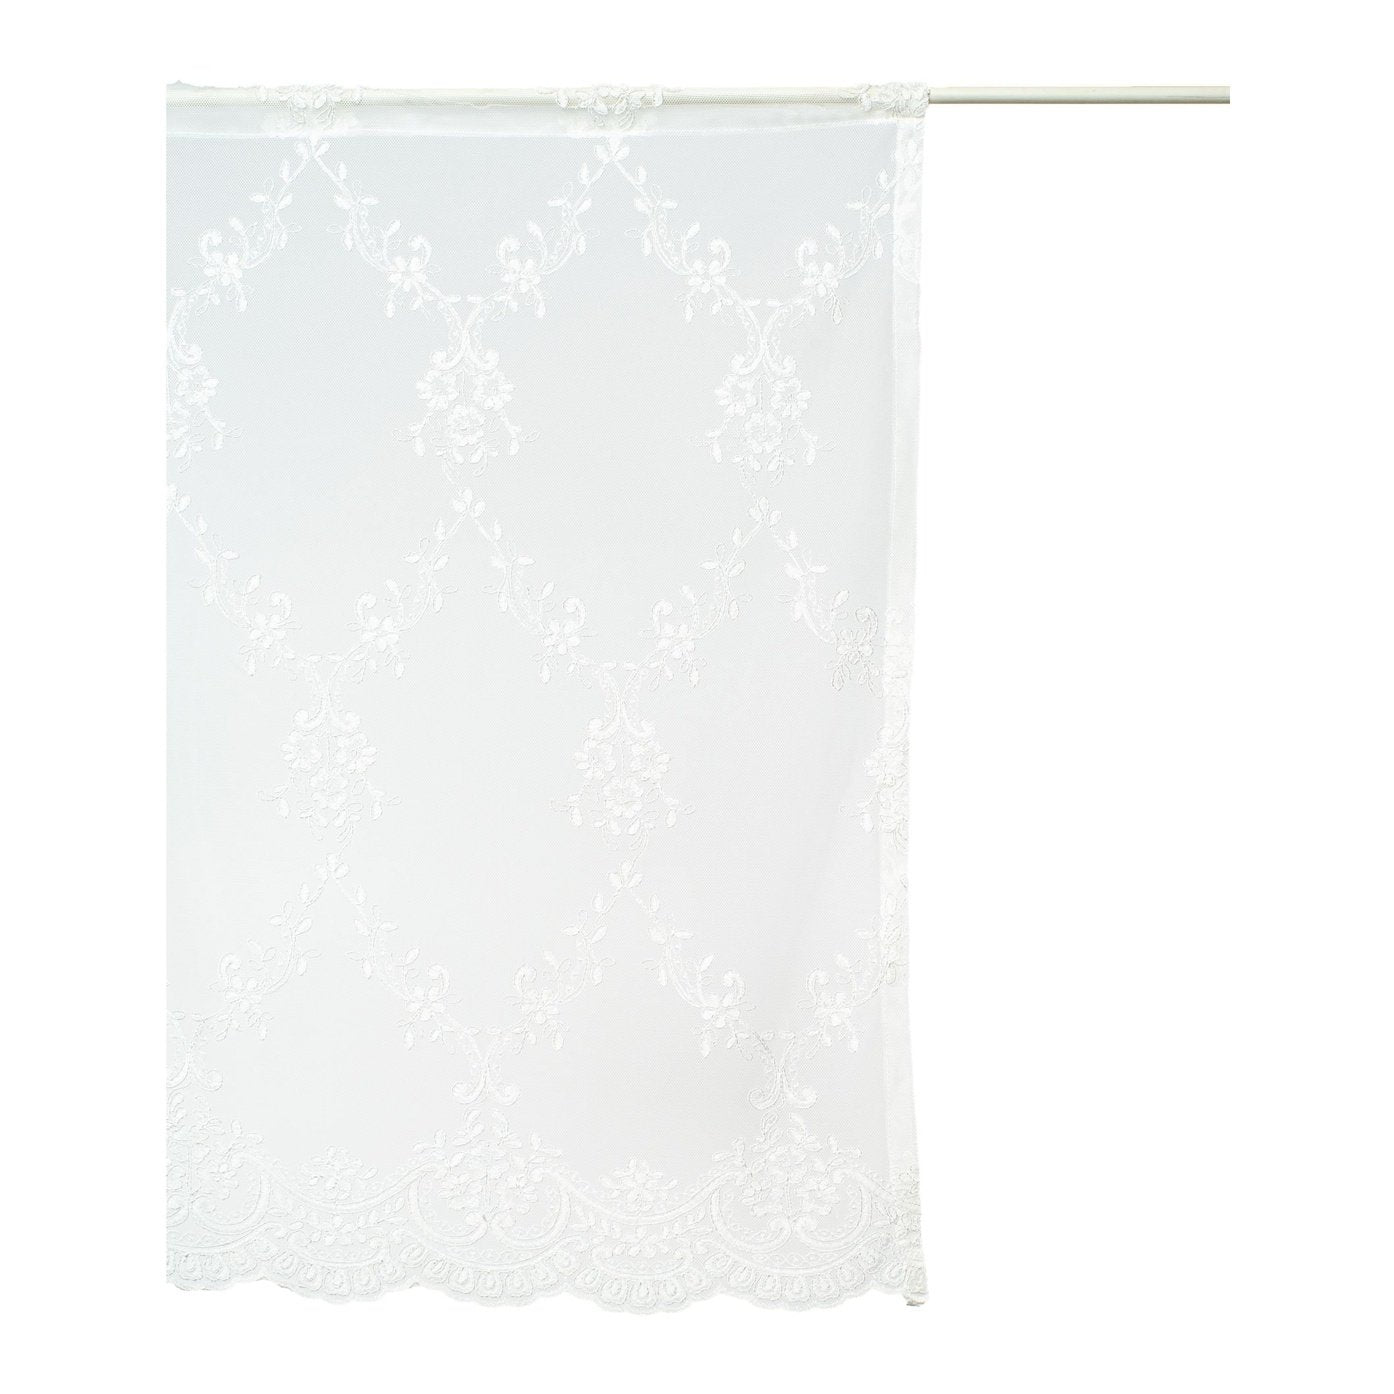 Exquisite embroidered lace curtain for sophisticated interiors.